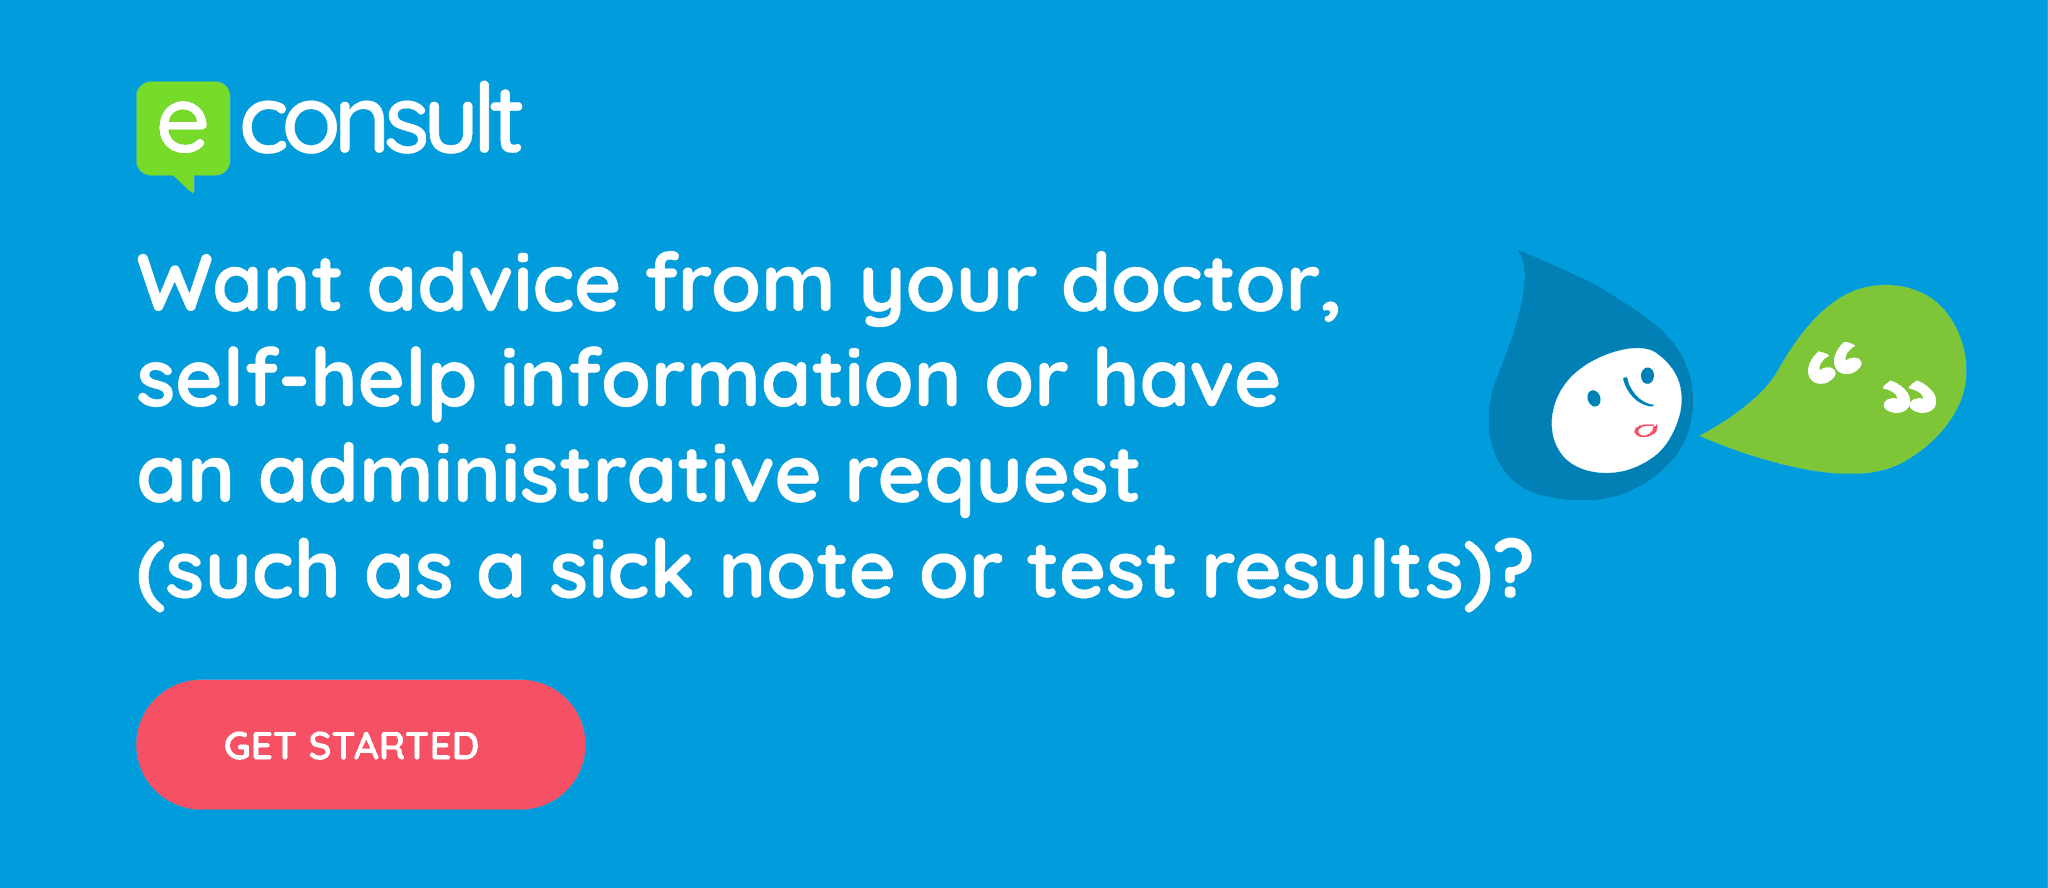 Want advice from your doctor, self-help information or have an administrative request, such as sick note or test result?